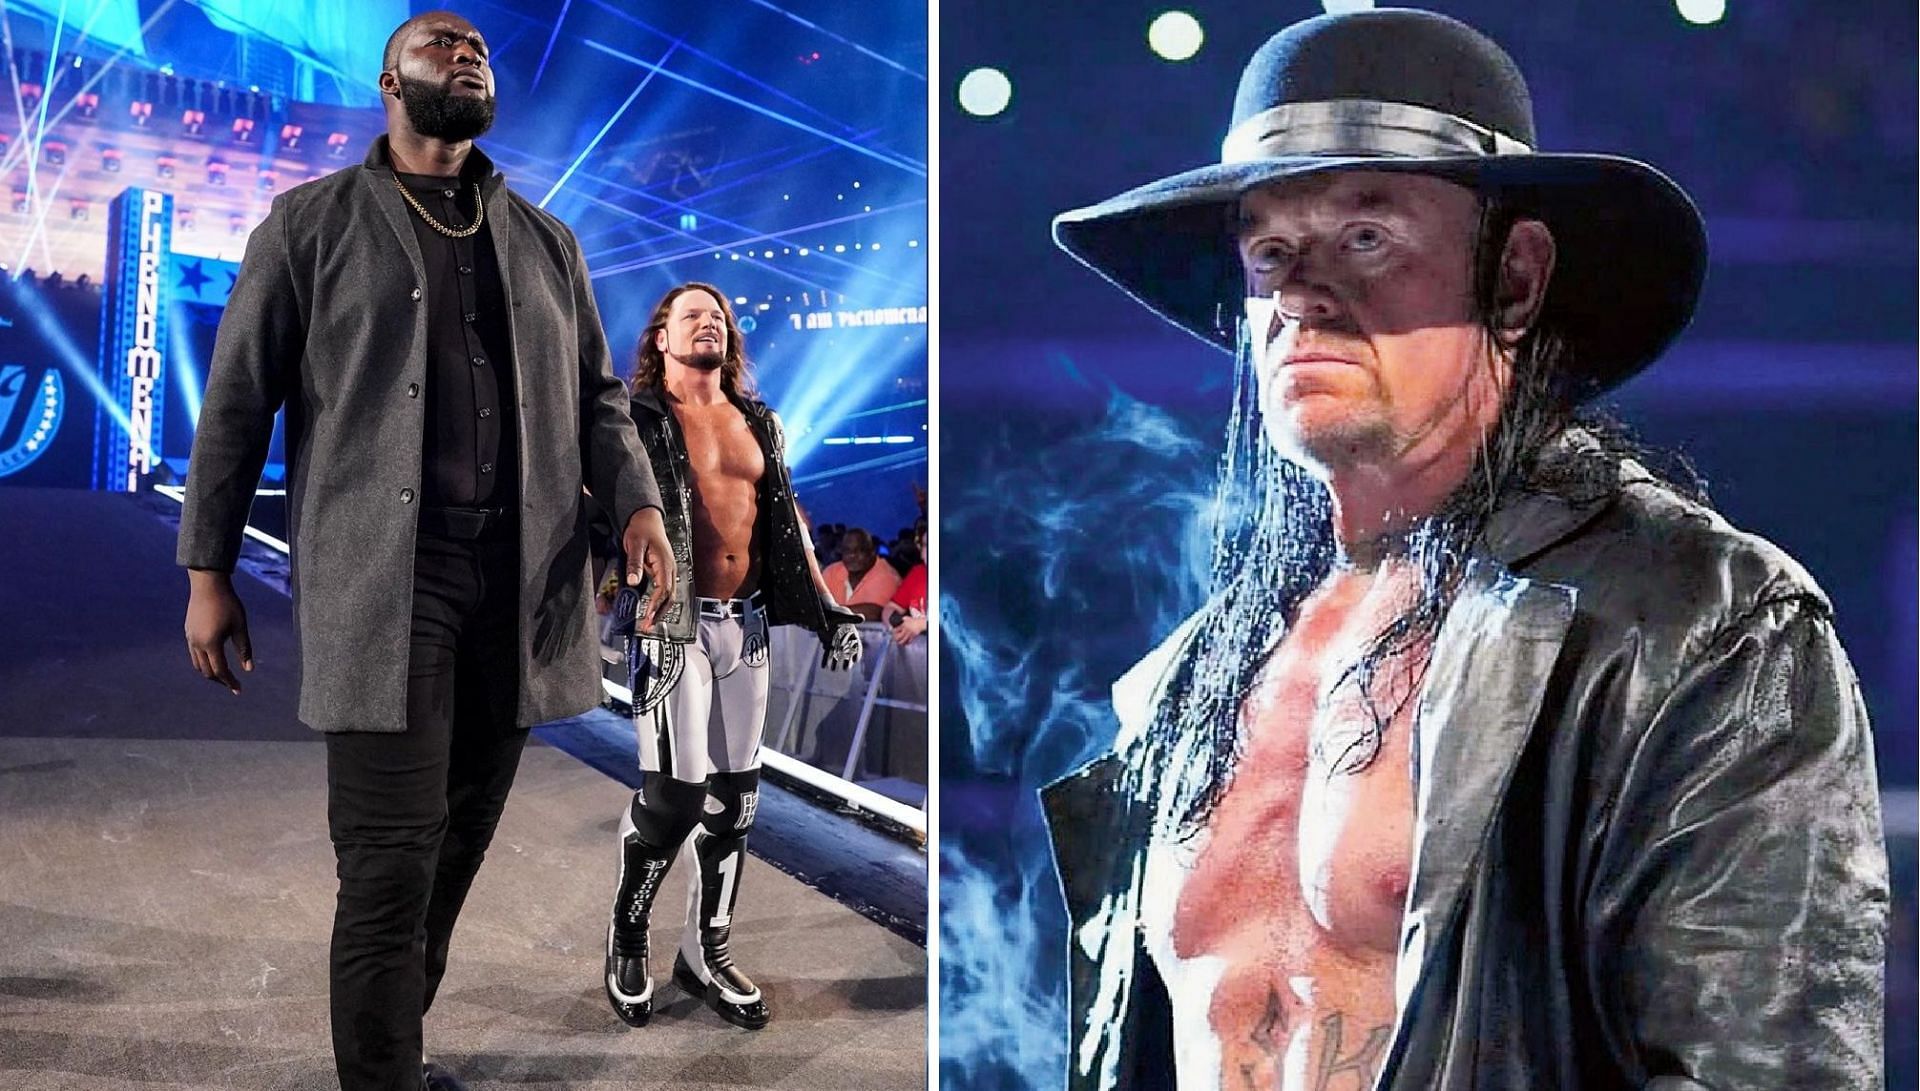 Omos approaches the ring with AJ Styles; The Undertaker